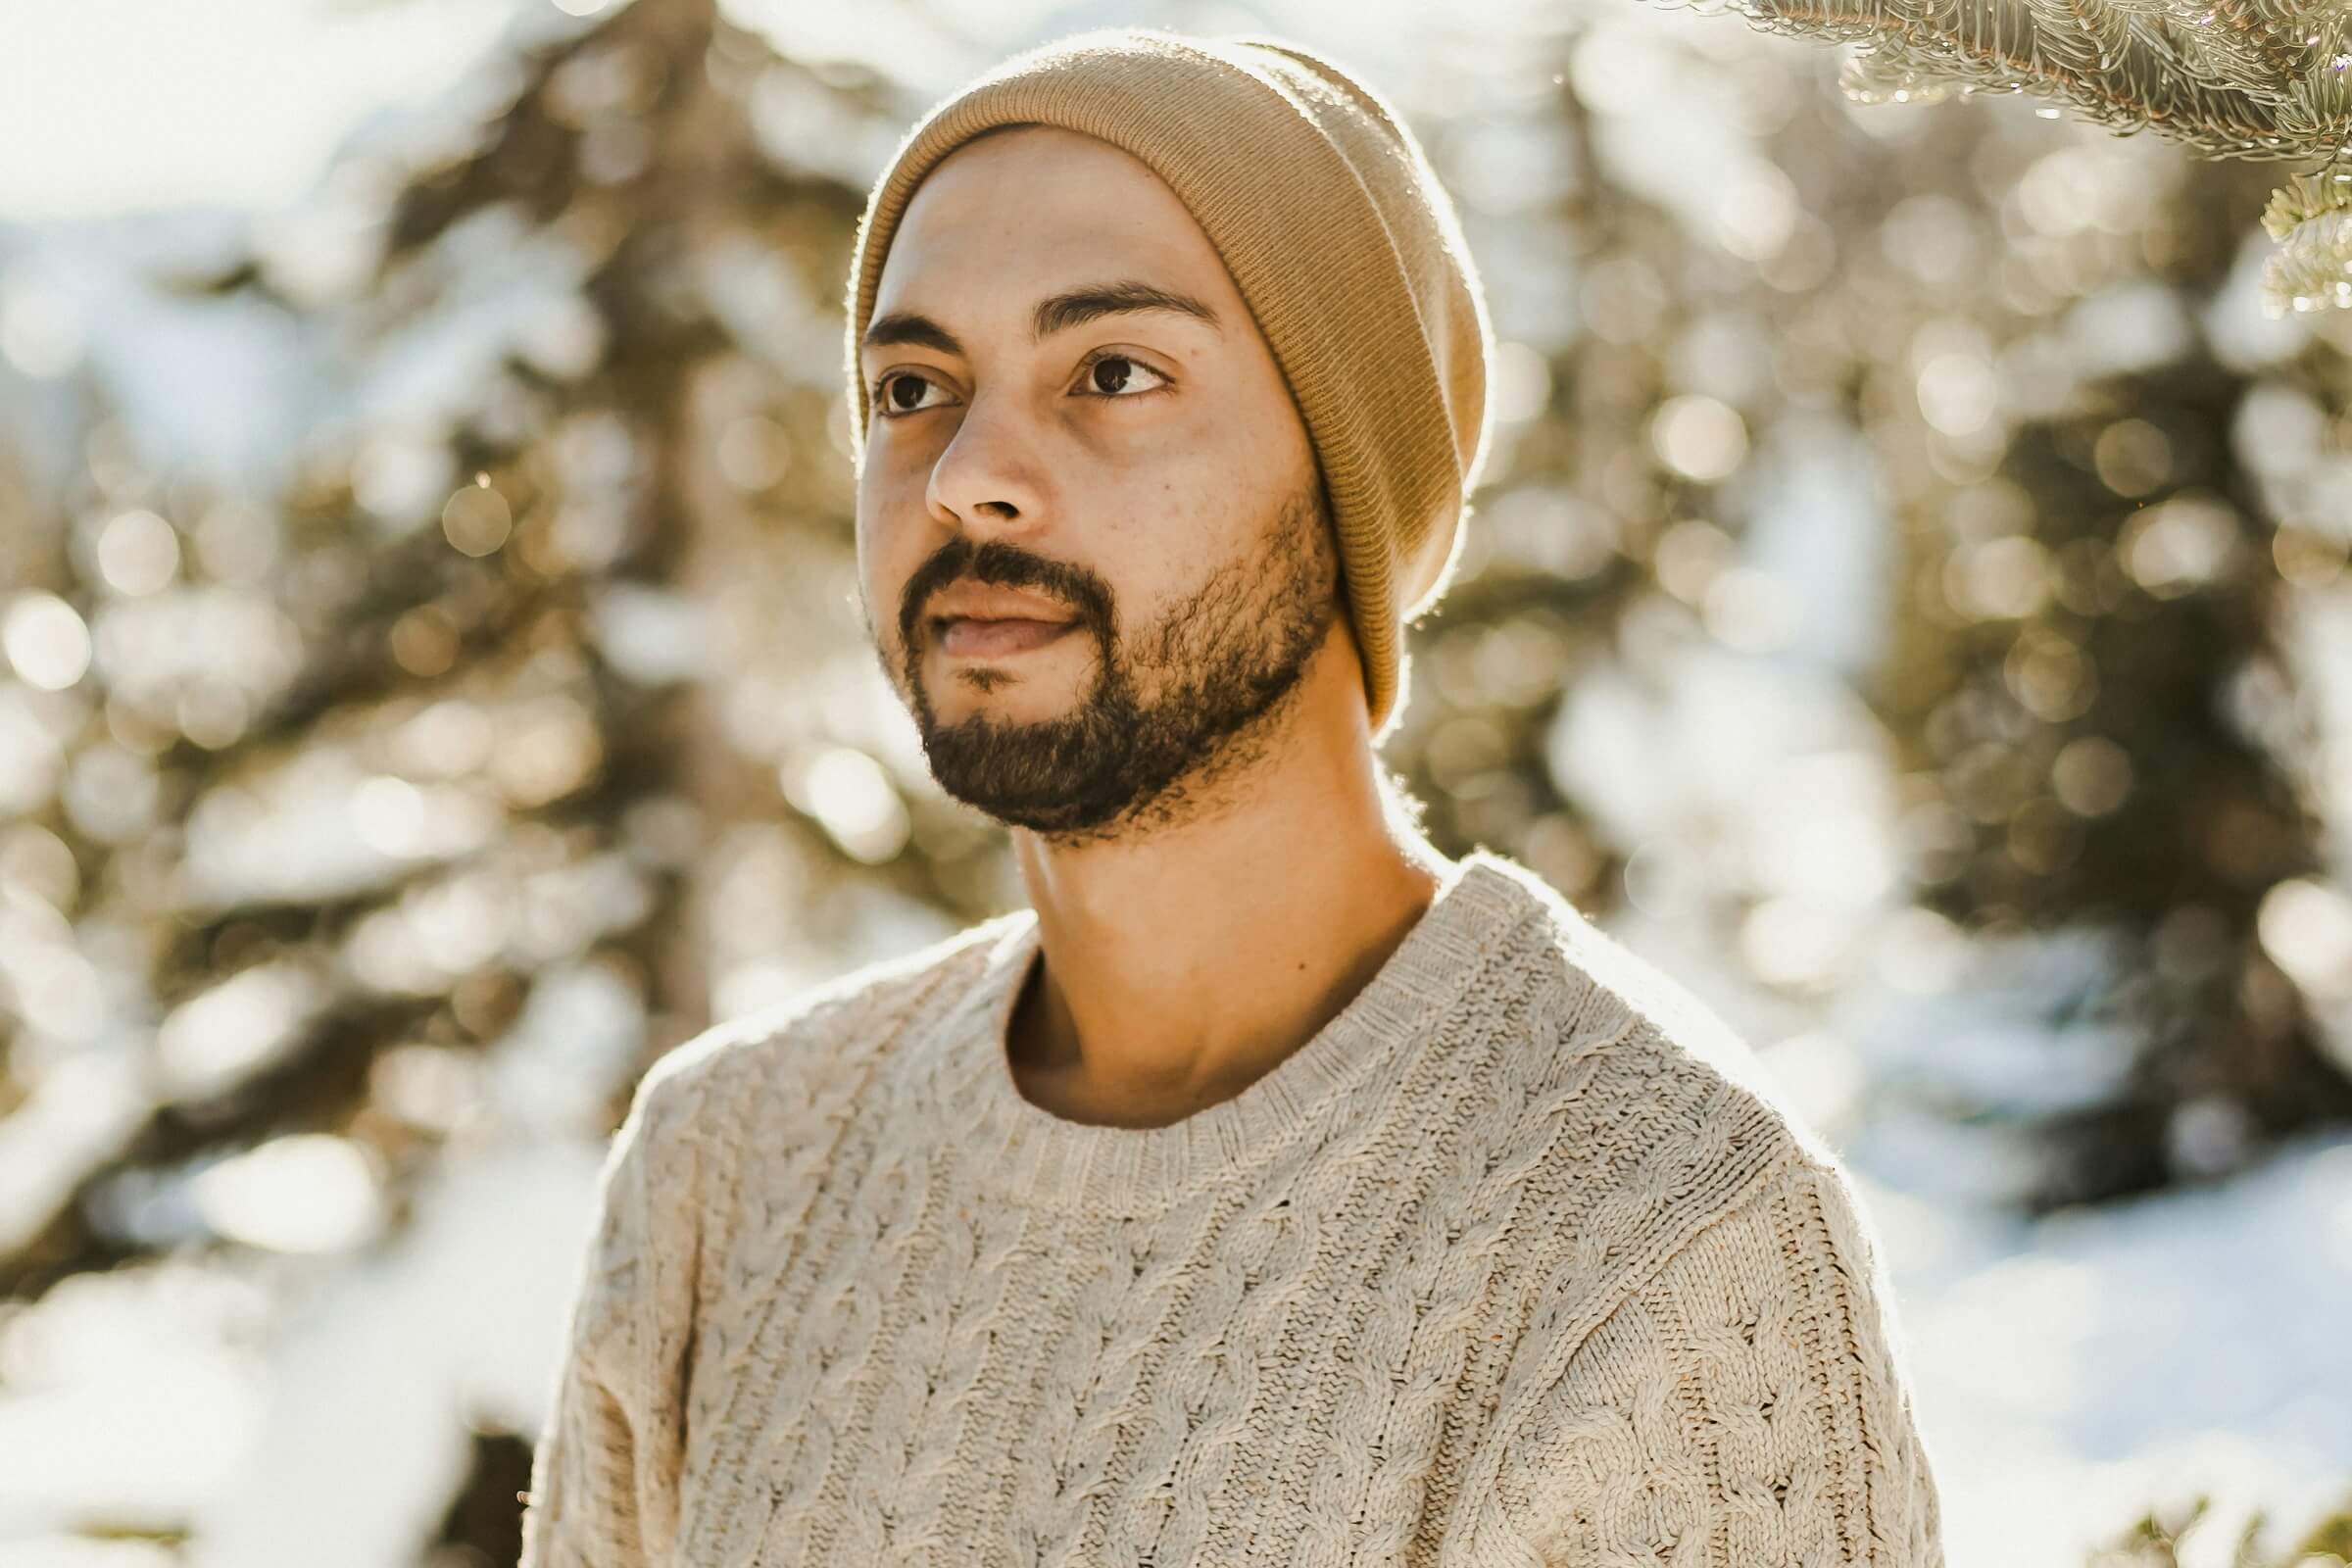 A man wears a thick sweater and a beanie outside in the snow.